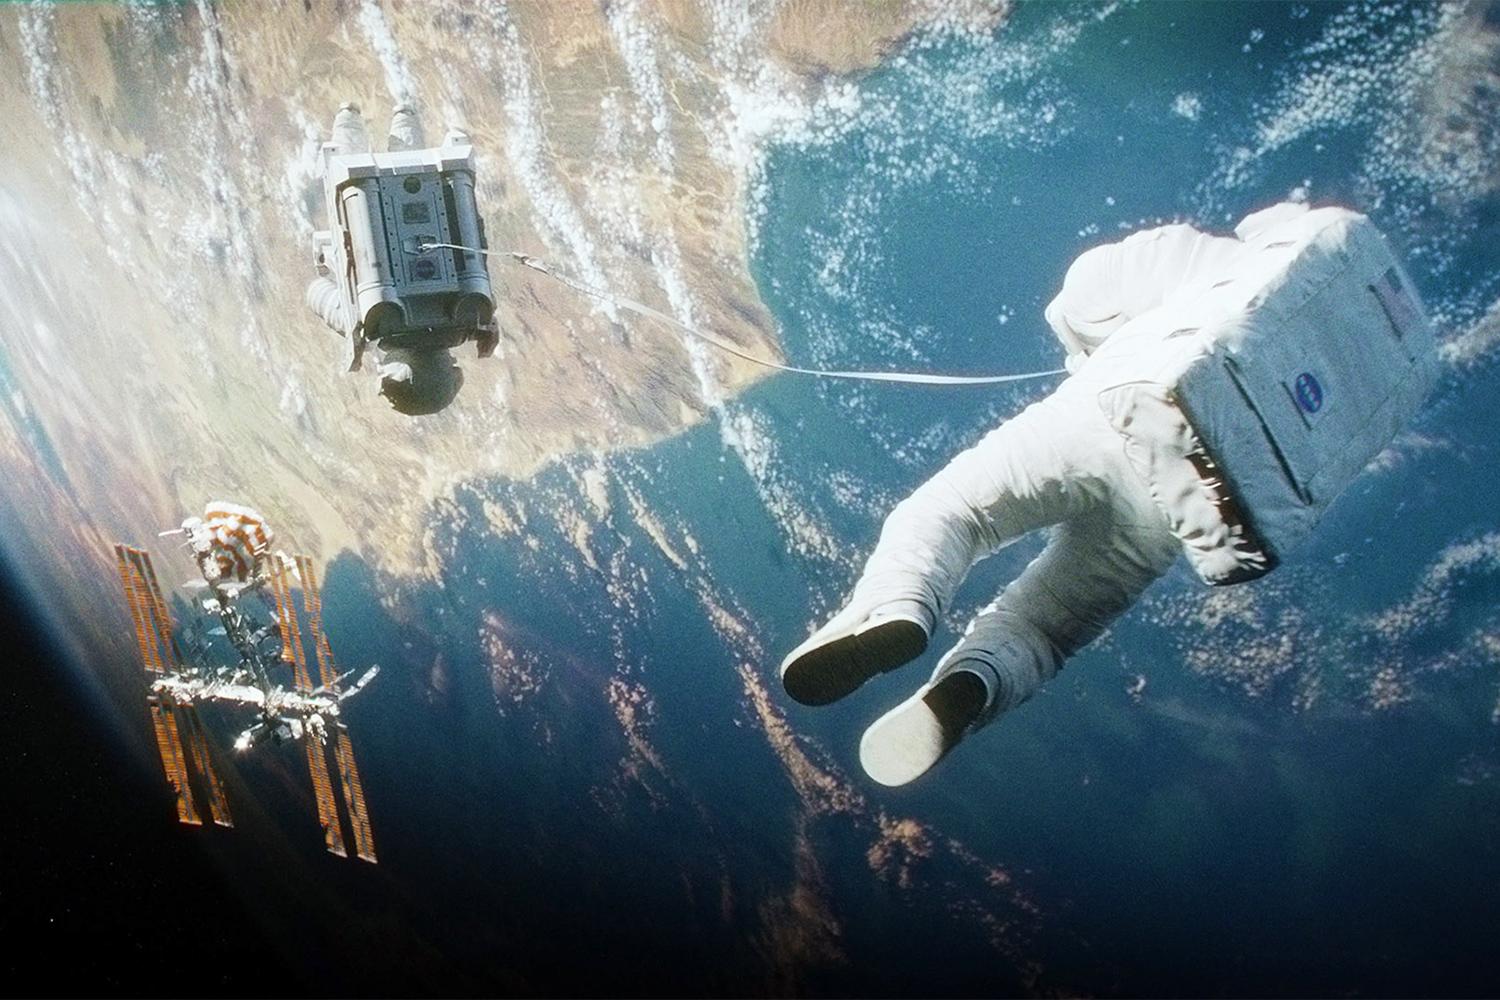 gravity movie review